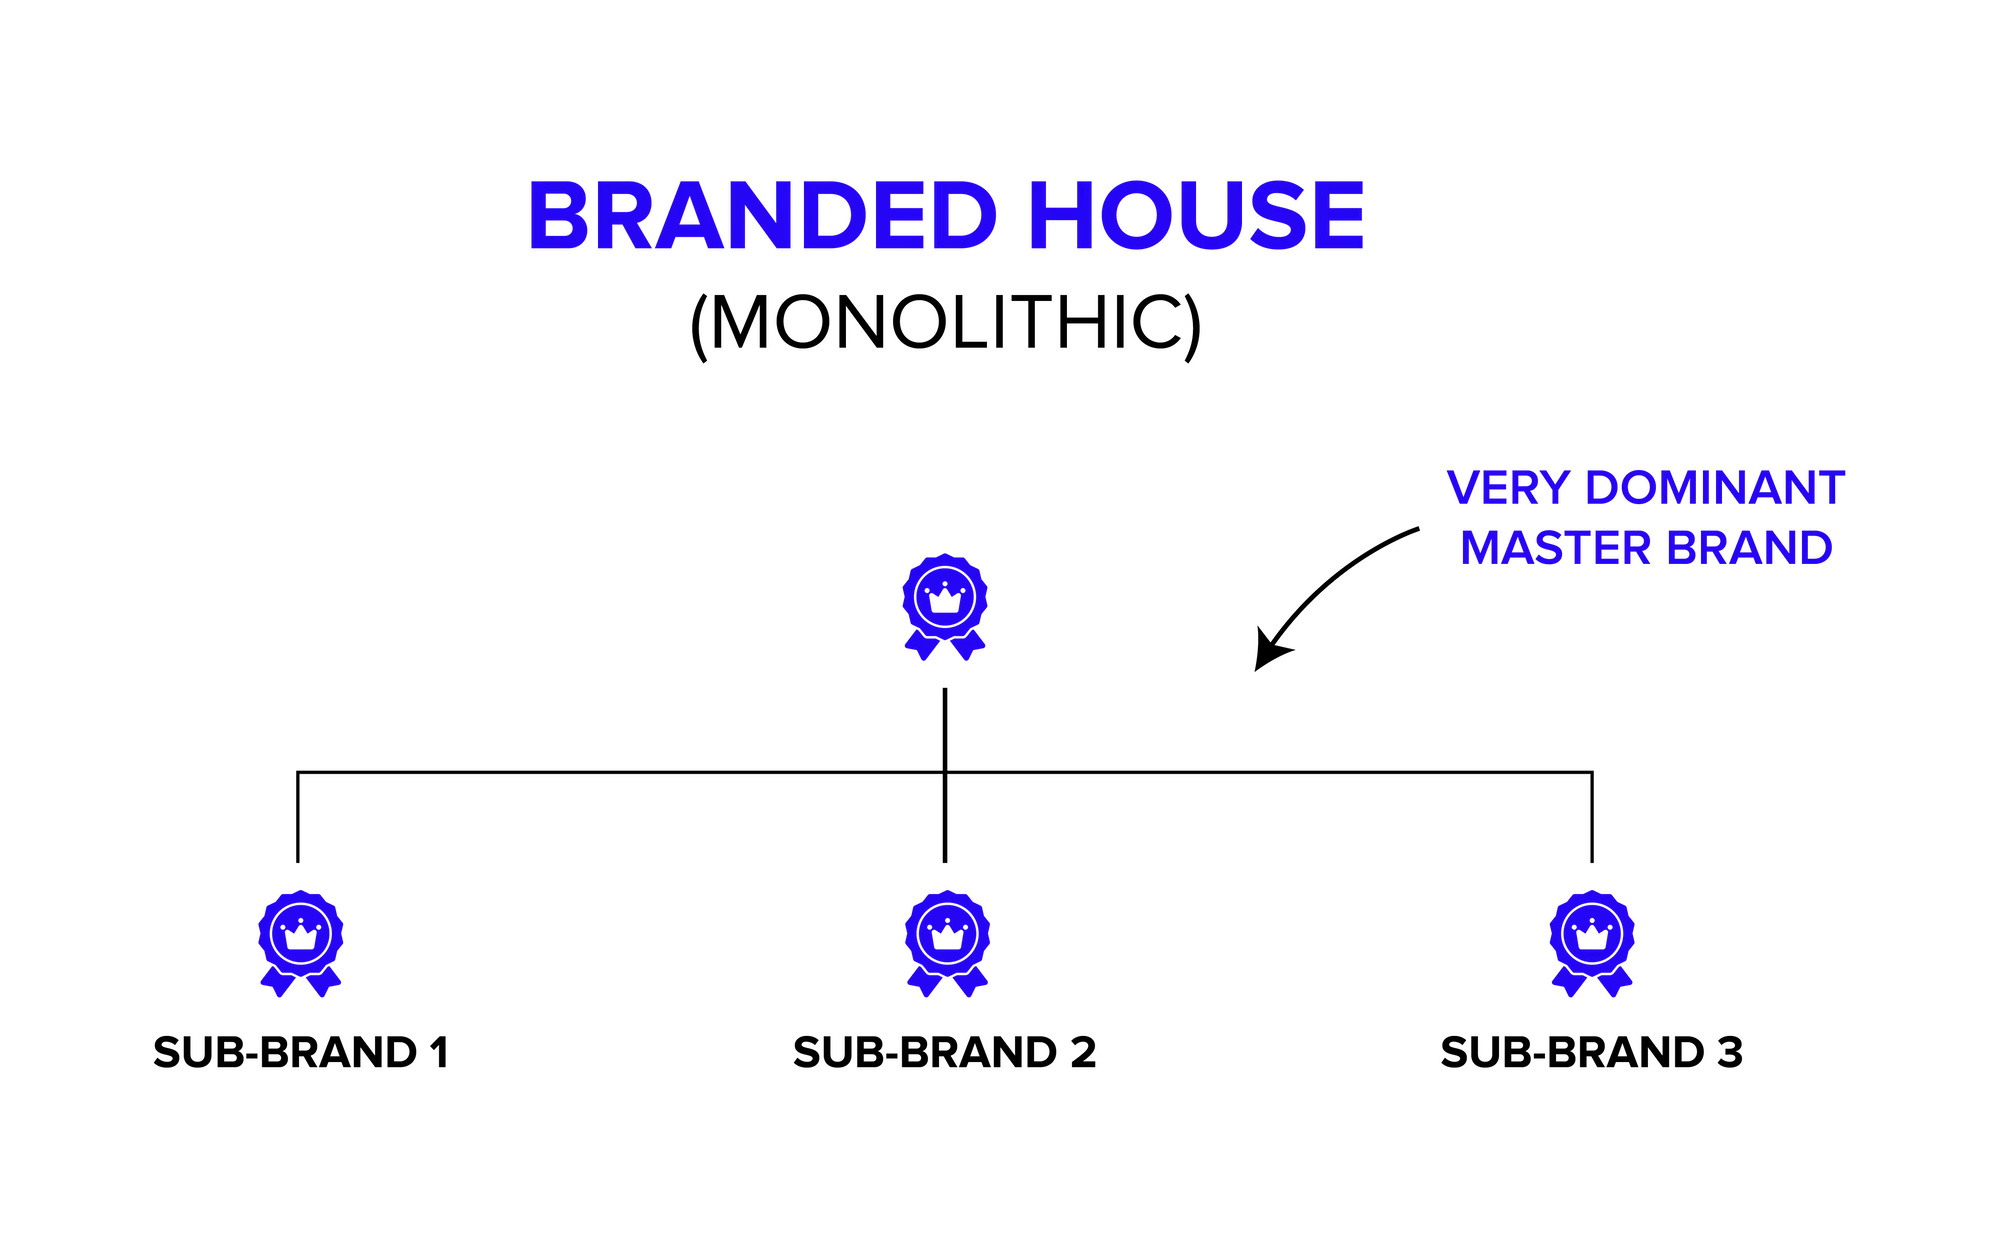 House of Brands